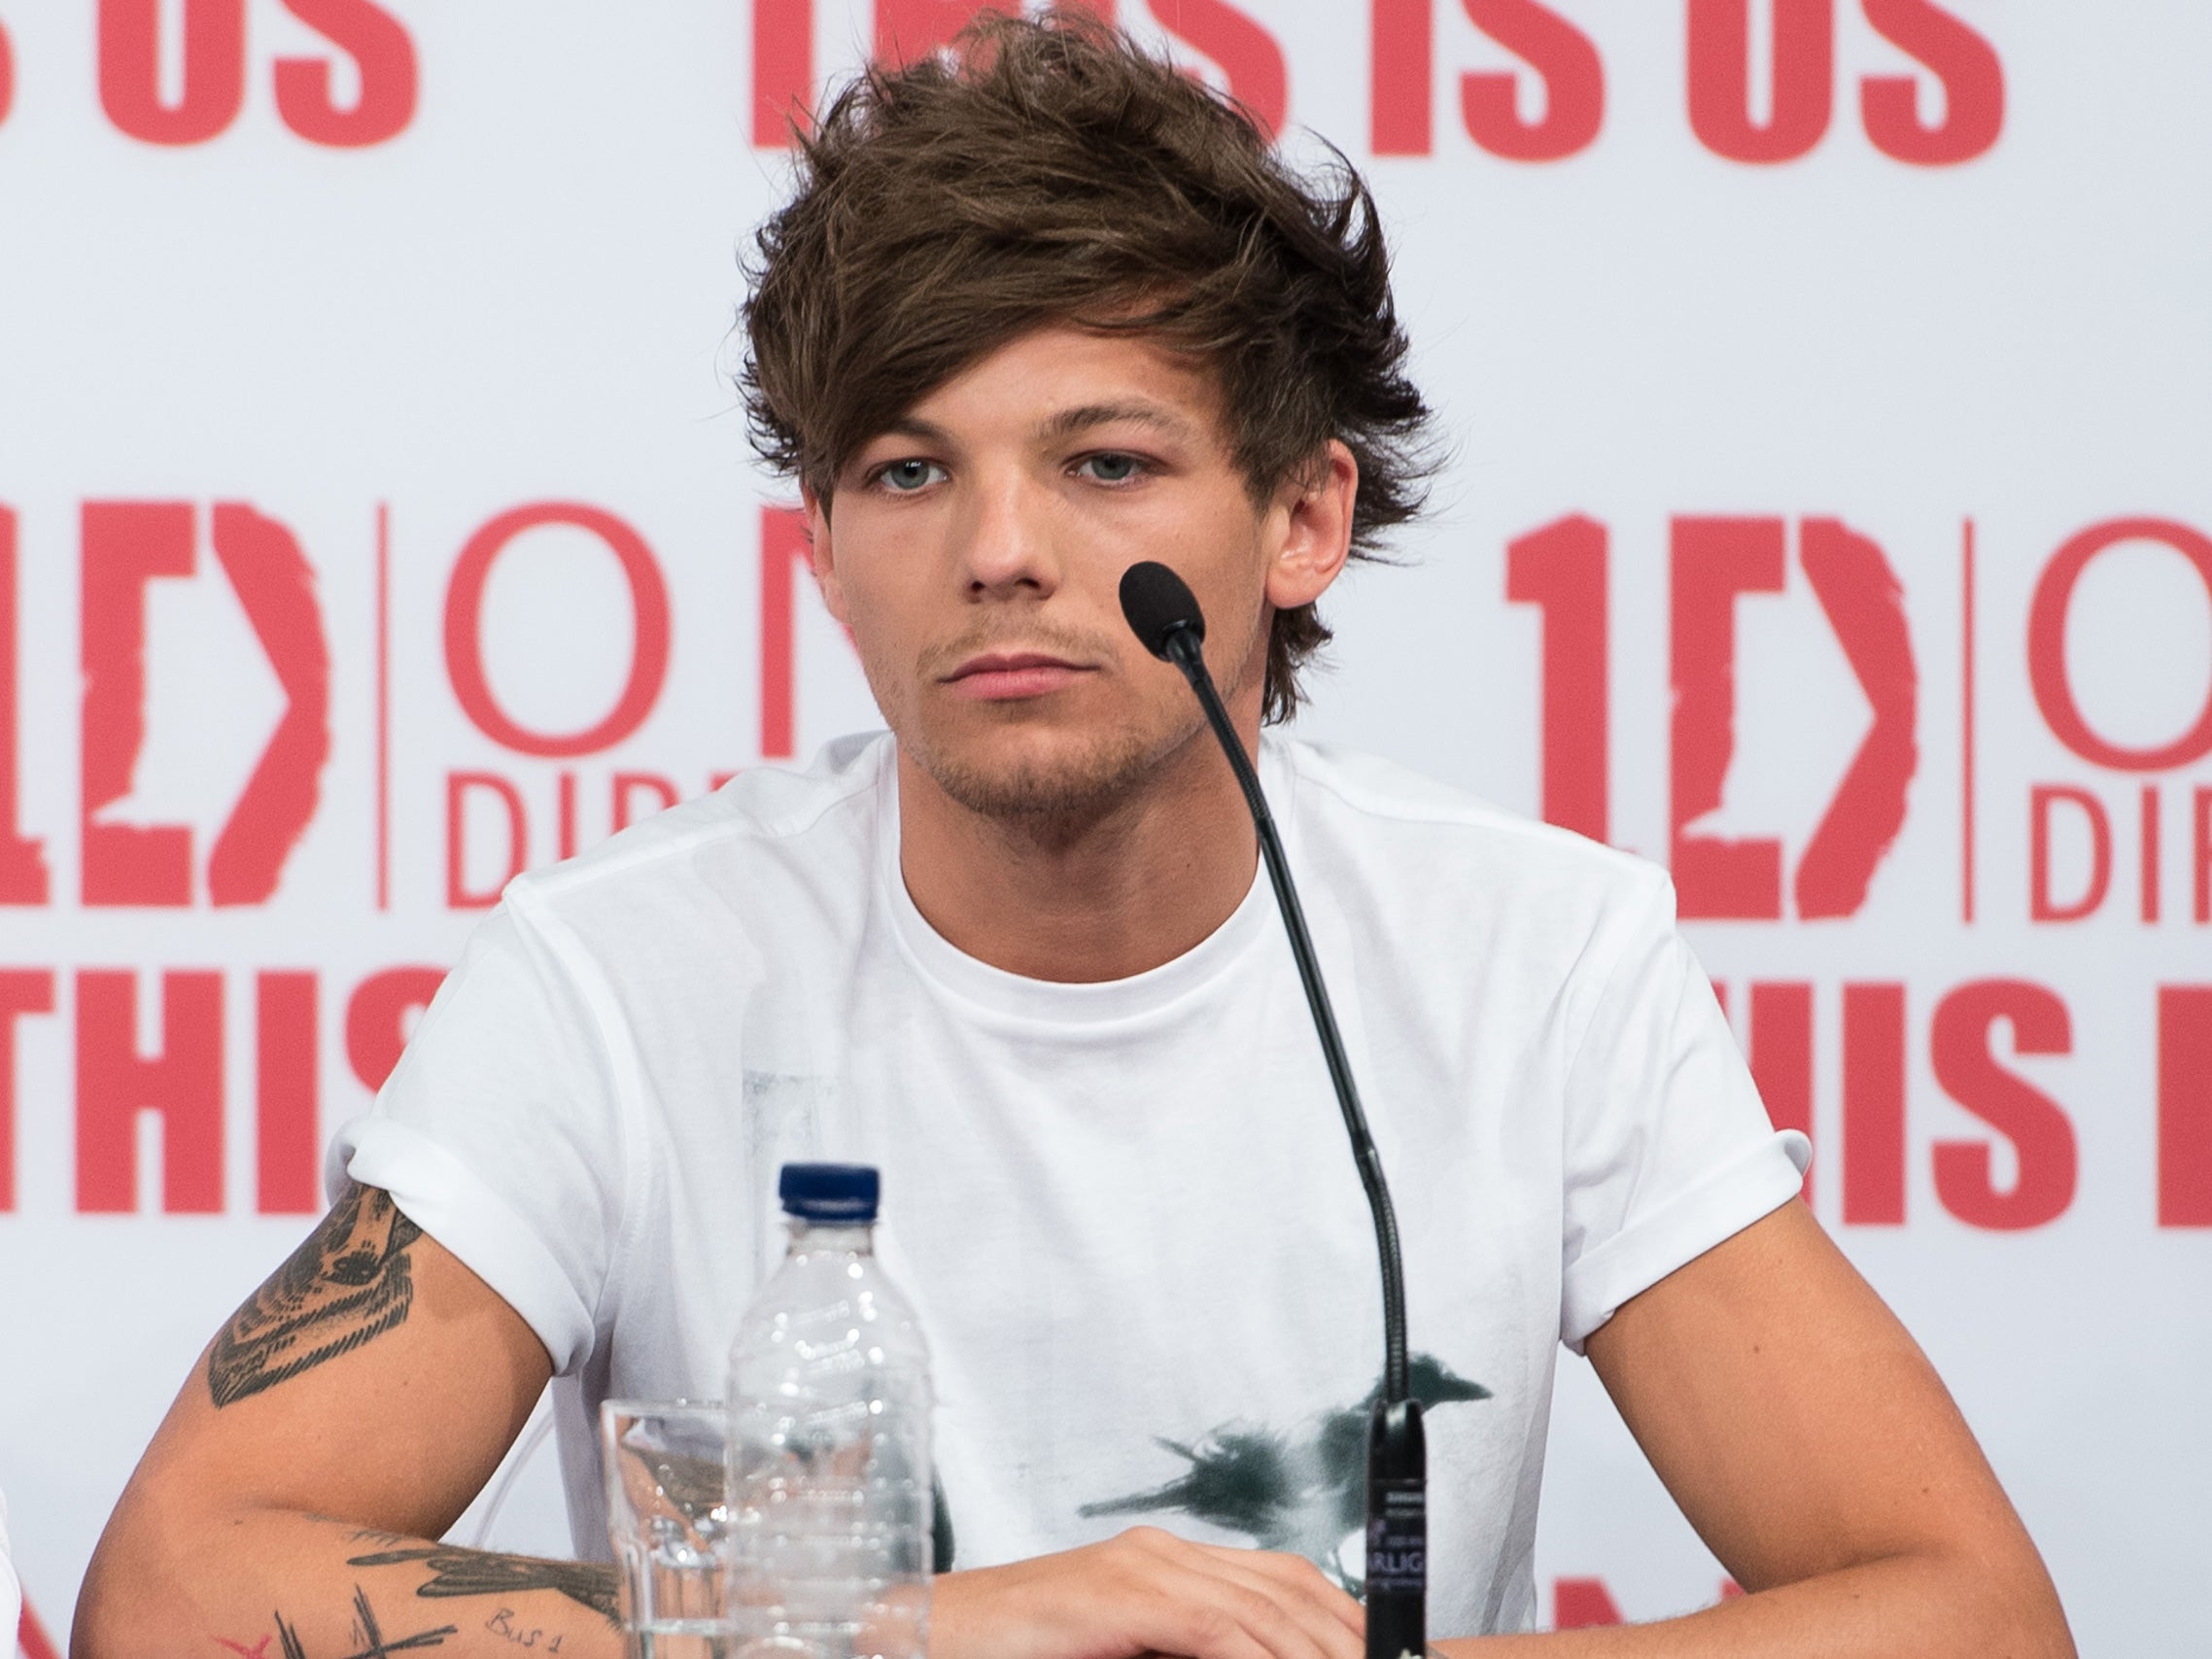 Louis Tomlinson became a first time father last month